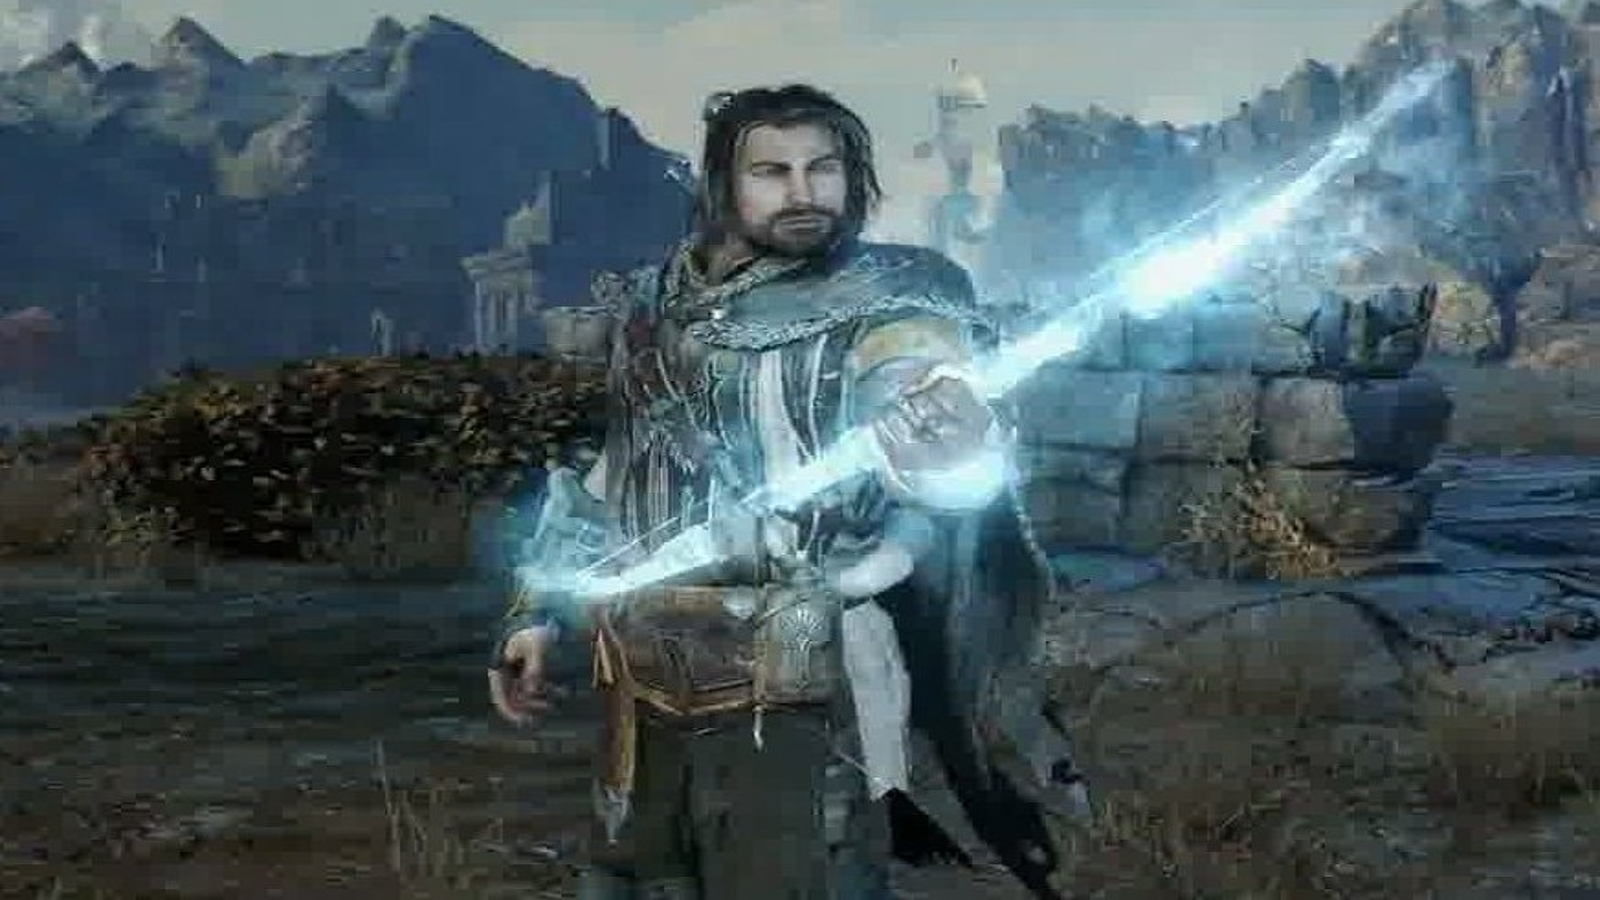 Dress up like the bad guy in this free Shadow of Mordor DLC